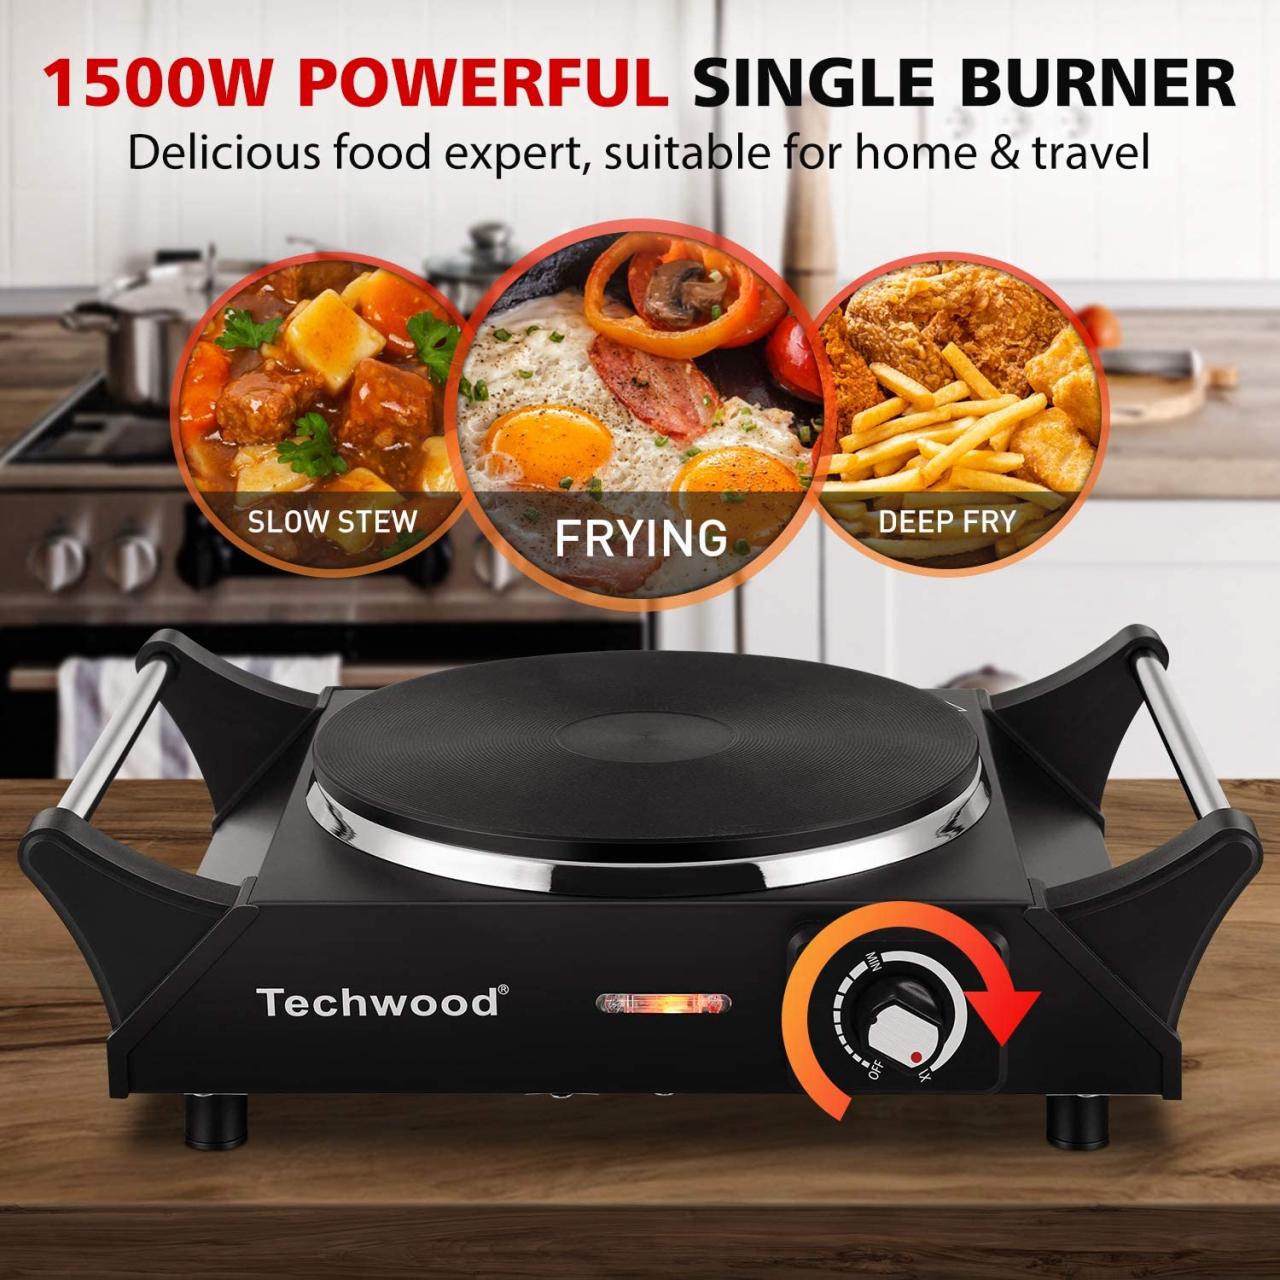 Techwood Hot Plate Electric Single Burner Portable Burner, 1500W with  Adjustable Temperature, Stay Cool Handles, Non-Slip Rubber Feet, Black  Stainless Steel Easy To Clean, Upgraded Version ES-3103 : Amazon.ca: Home